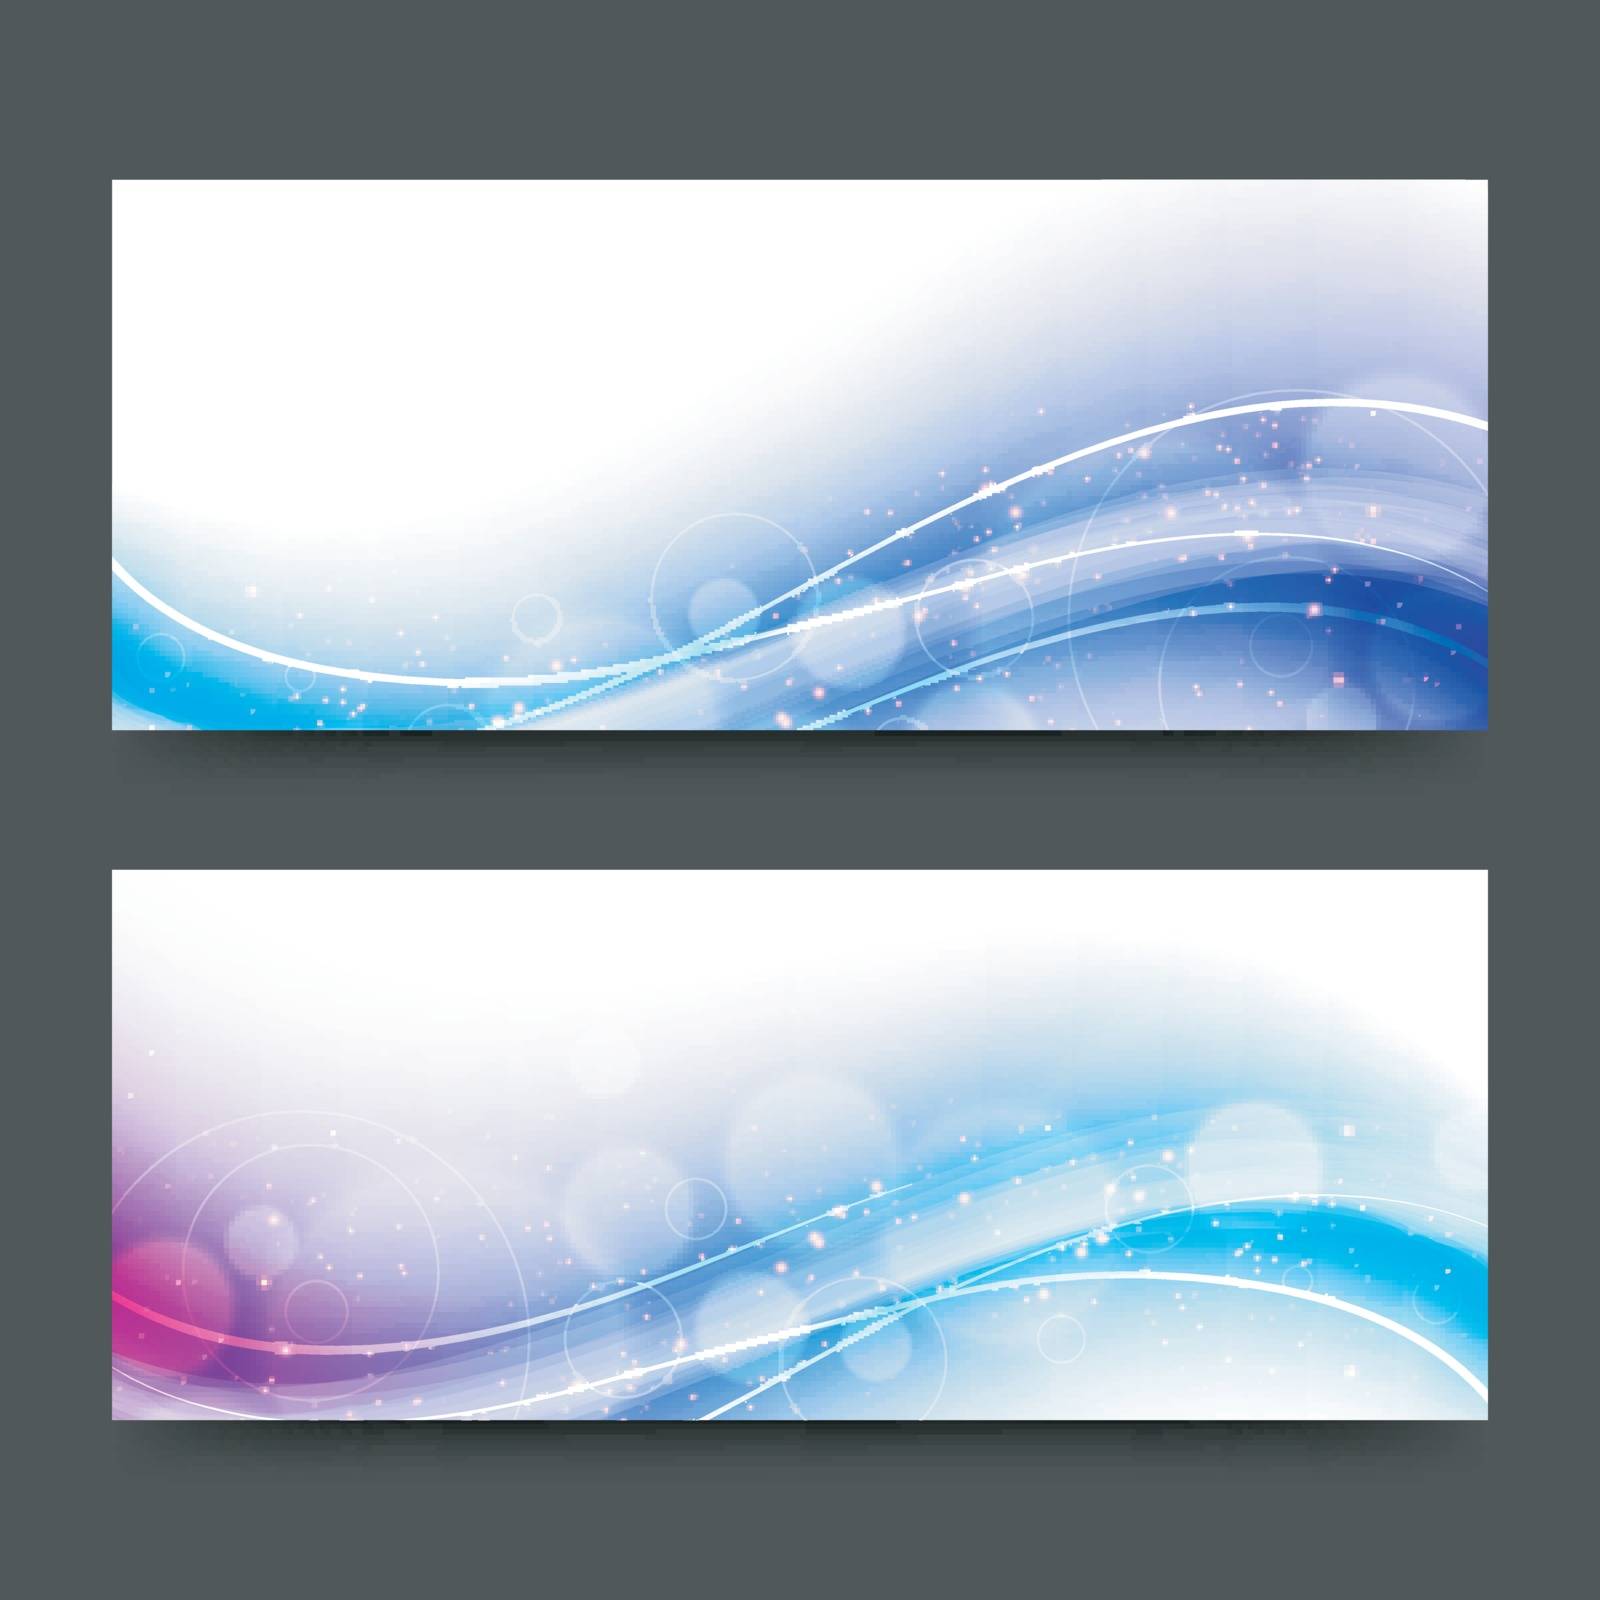 Website headers or banners set with glossy abstract waves design.